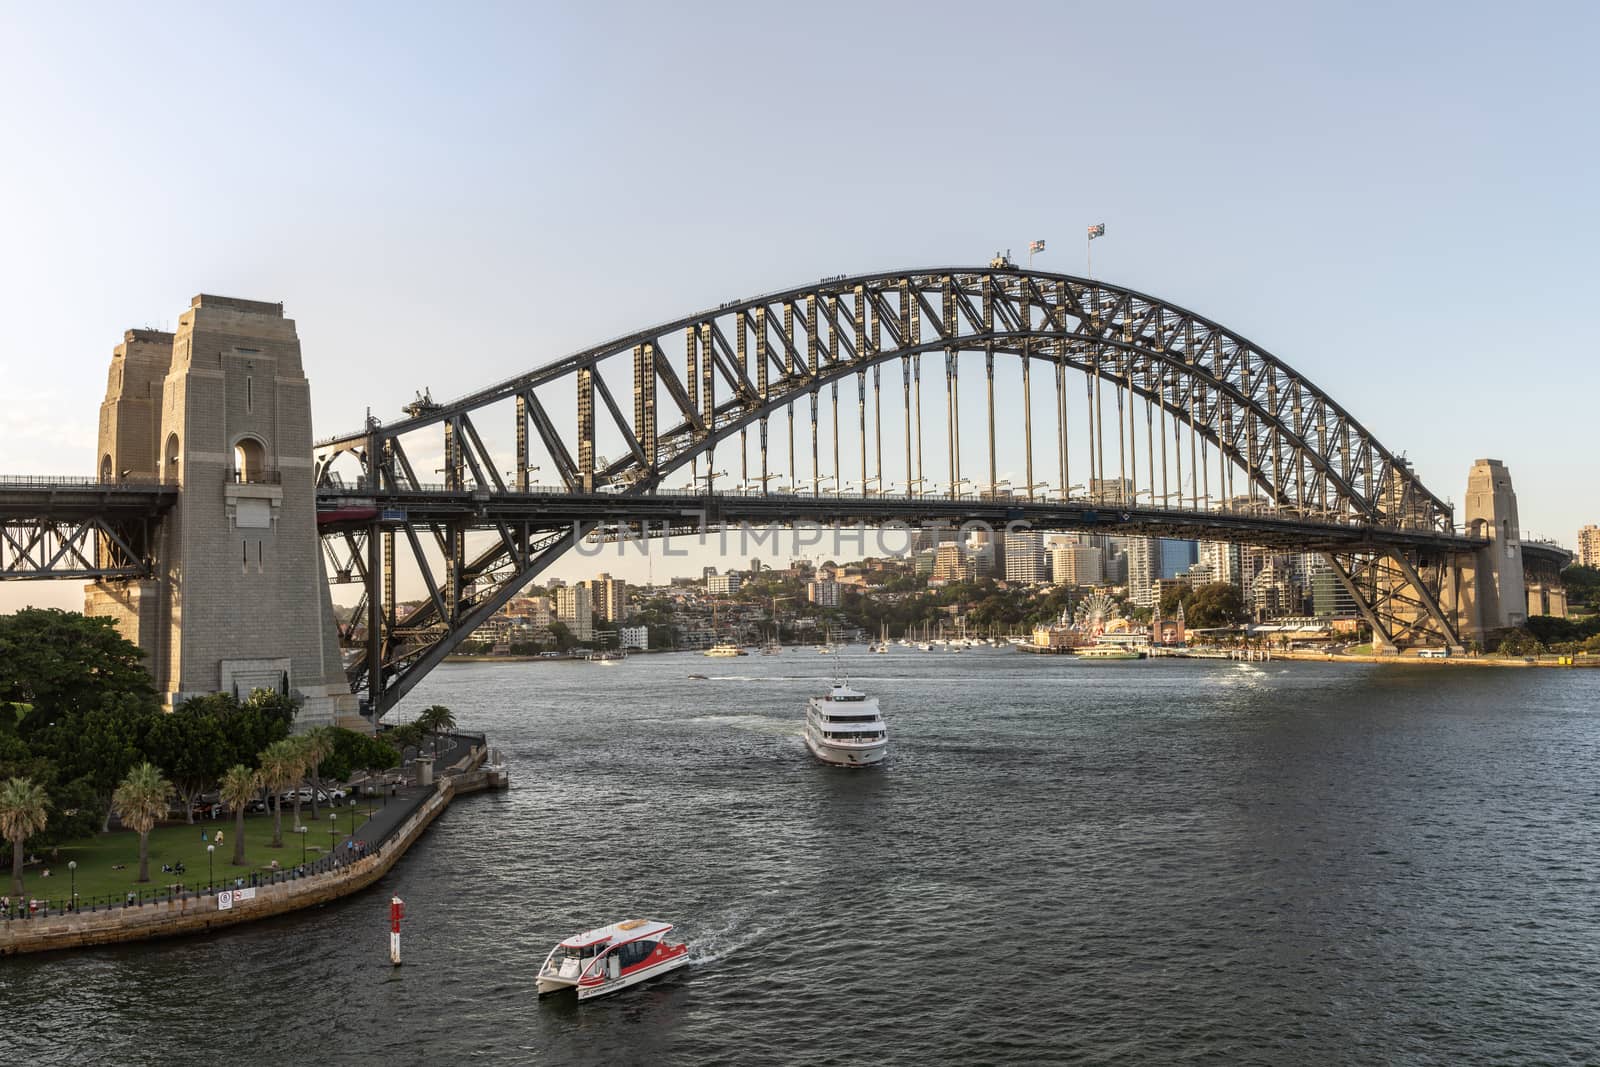 Sydney, Australia - February 12, 2019: Harbour bridge against pale blue sky and boats in the water. Horizon is north shore of bay with Kirribilli neighborhood and Luna Park.